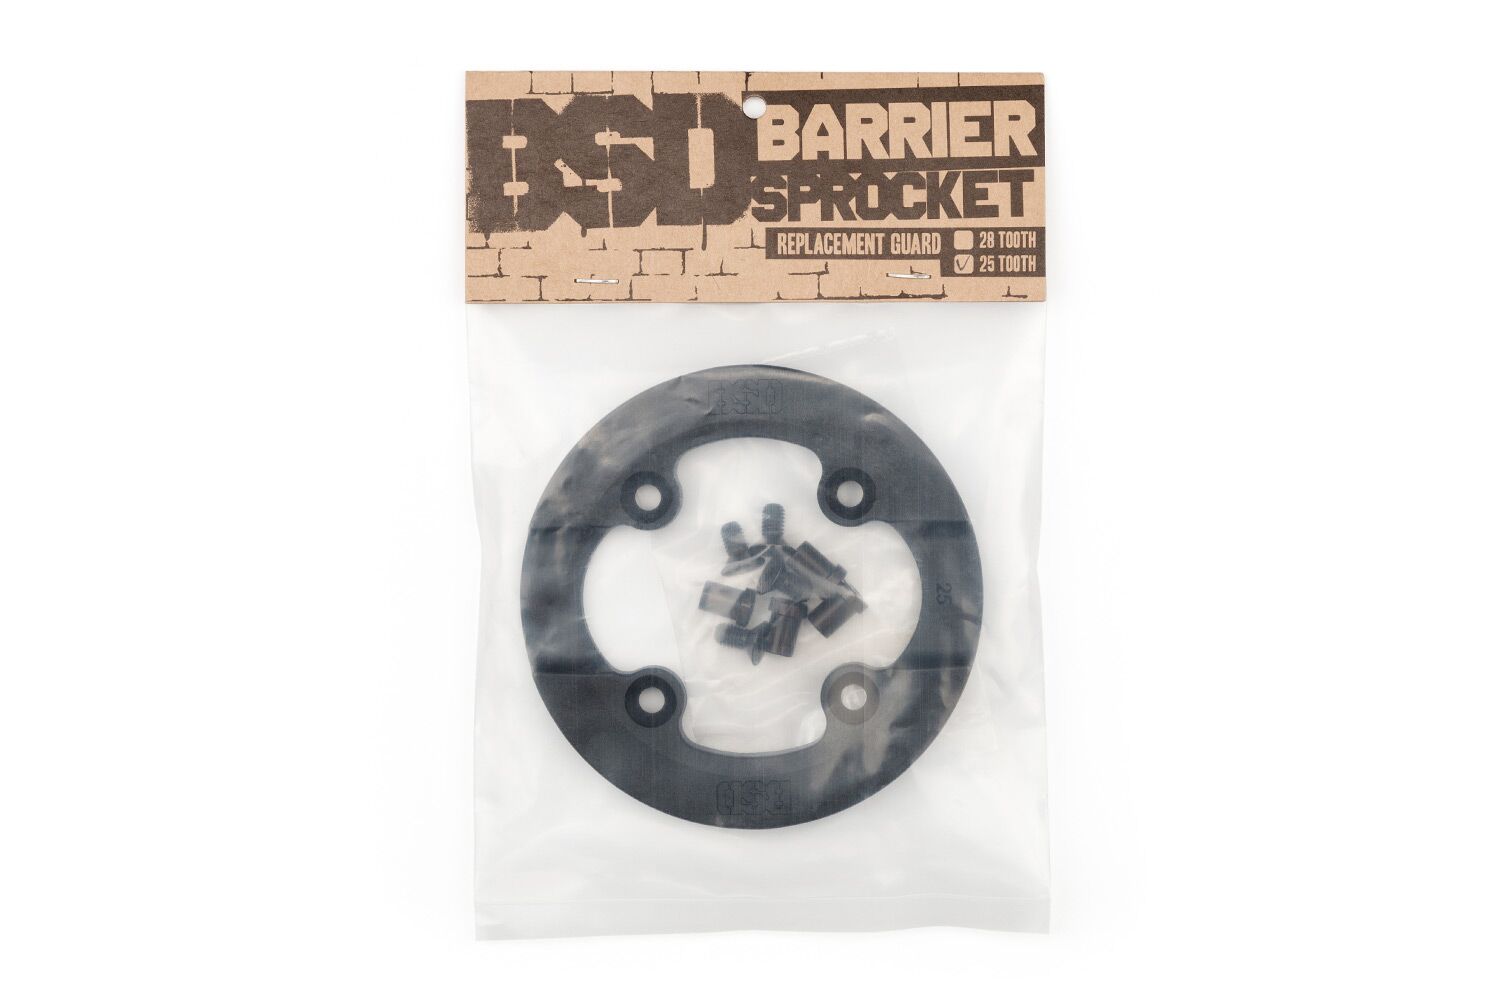 【BMX スプロケット】 BSD (ビーエスディー) BARRIER SPROCKET REPLACEMENT GUARD 28T